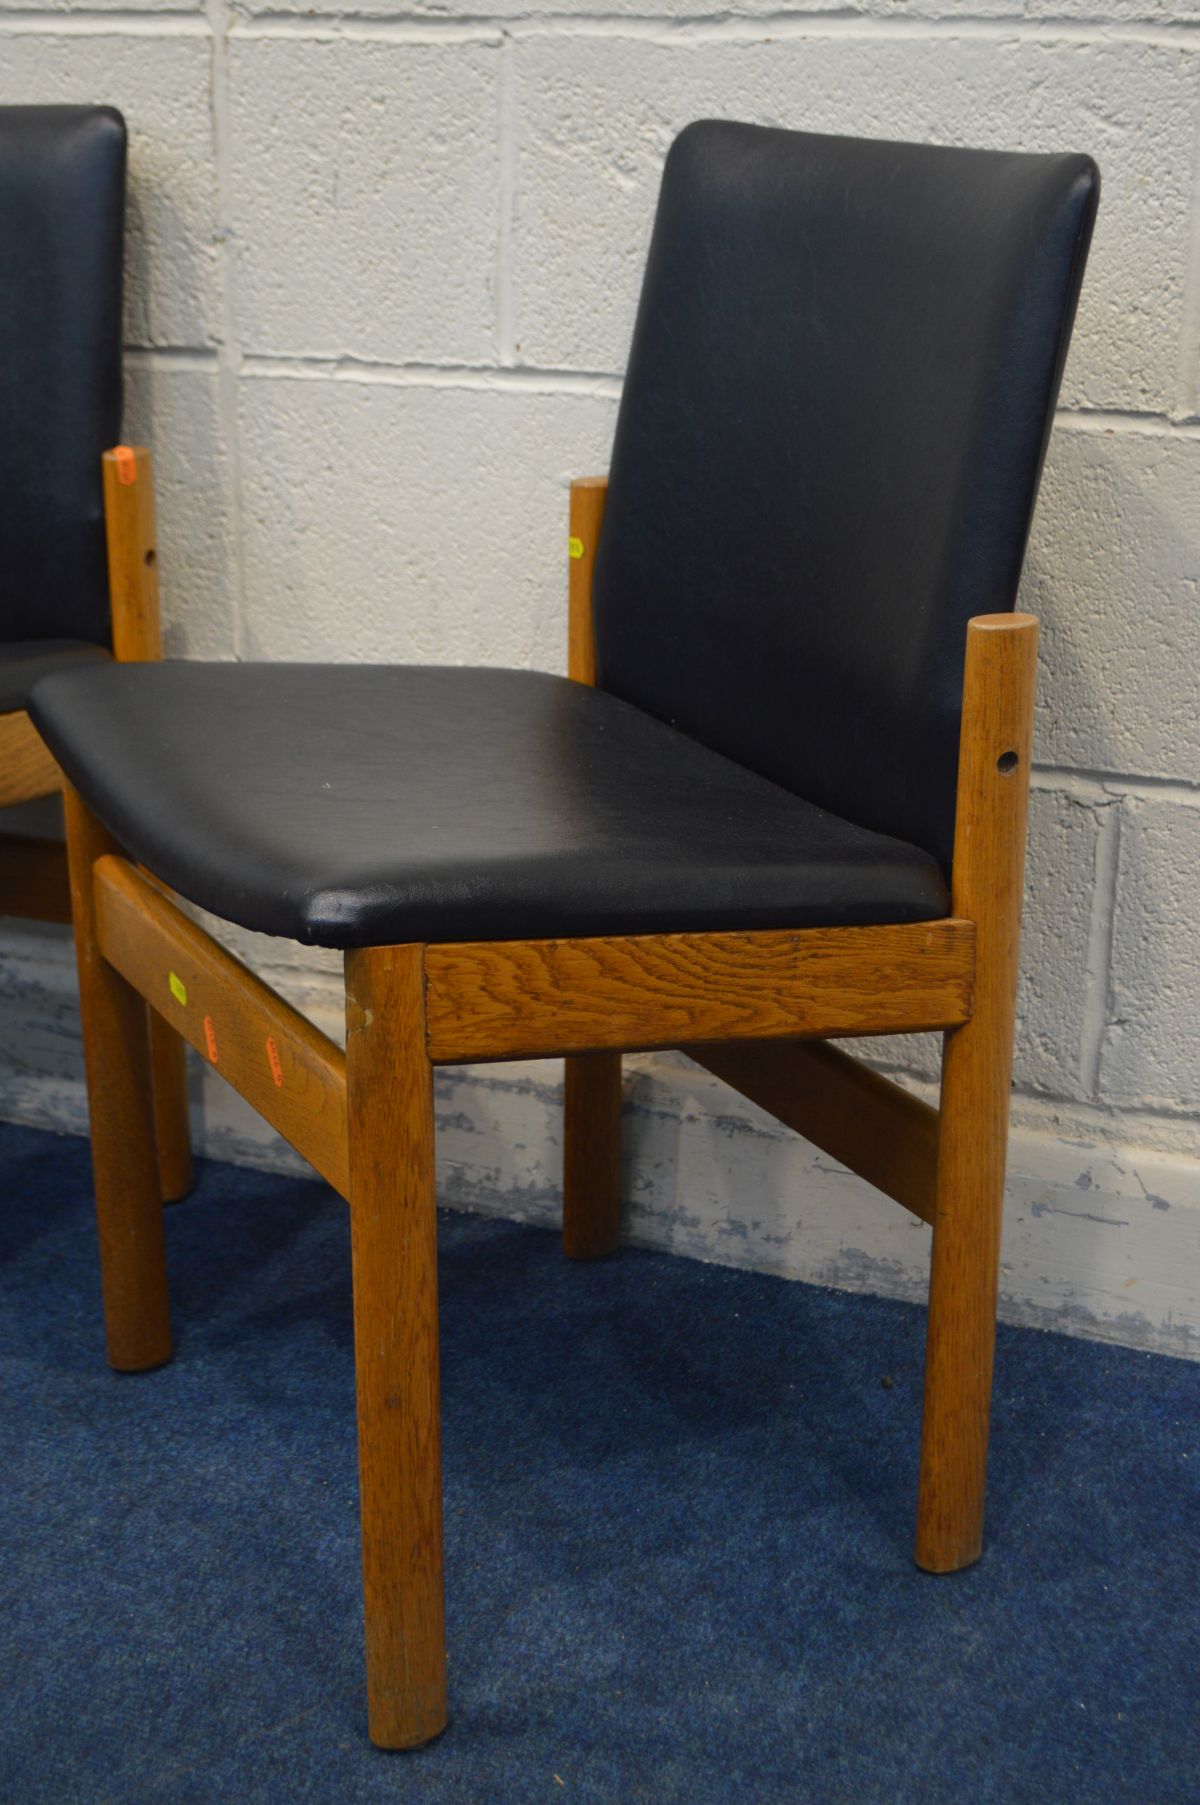 A PAIR OF MID TO LATE 20TH CENTURY OAK FRAMED AND BLACK LEATHERETTE CHAIRS - Image 2 of 2